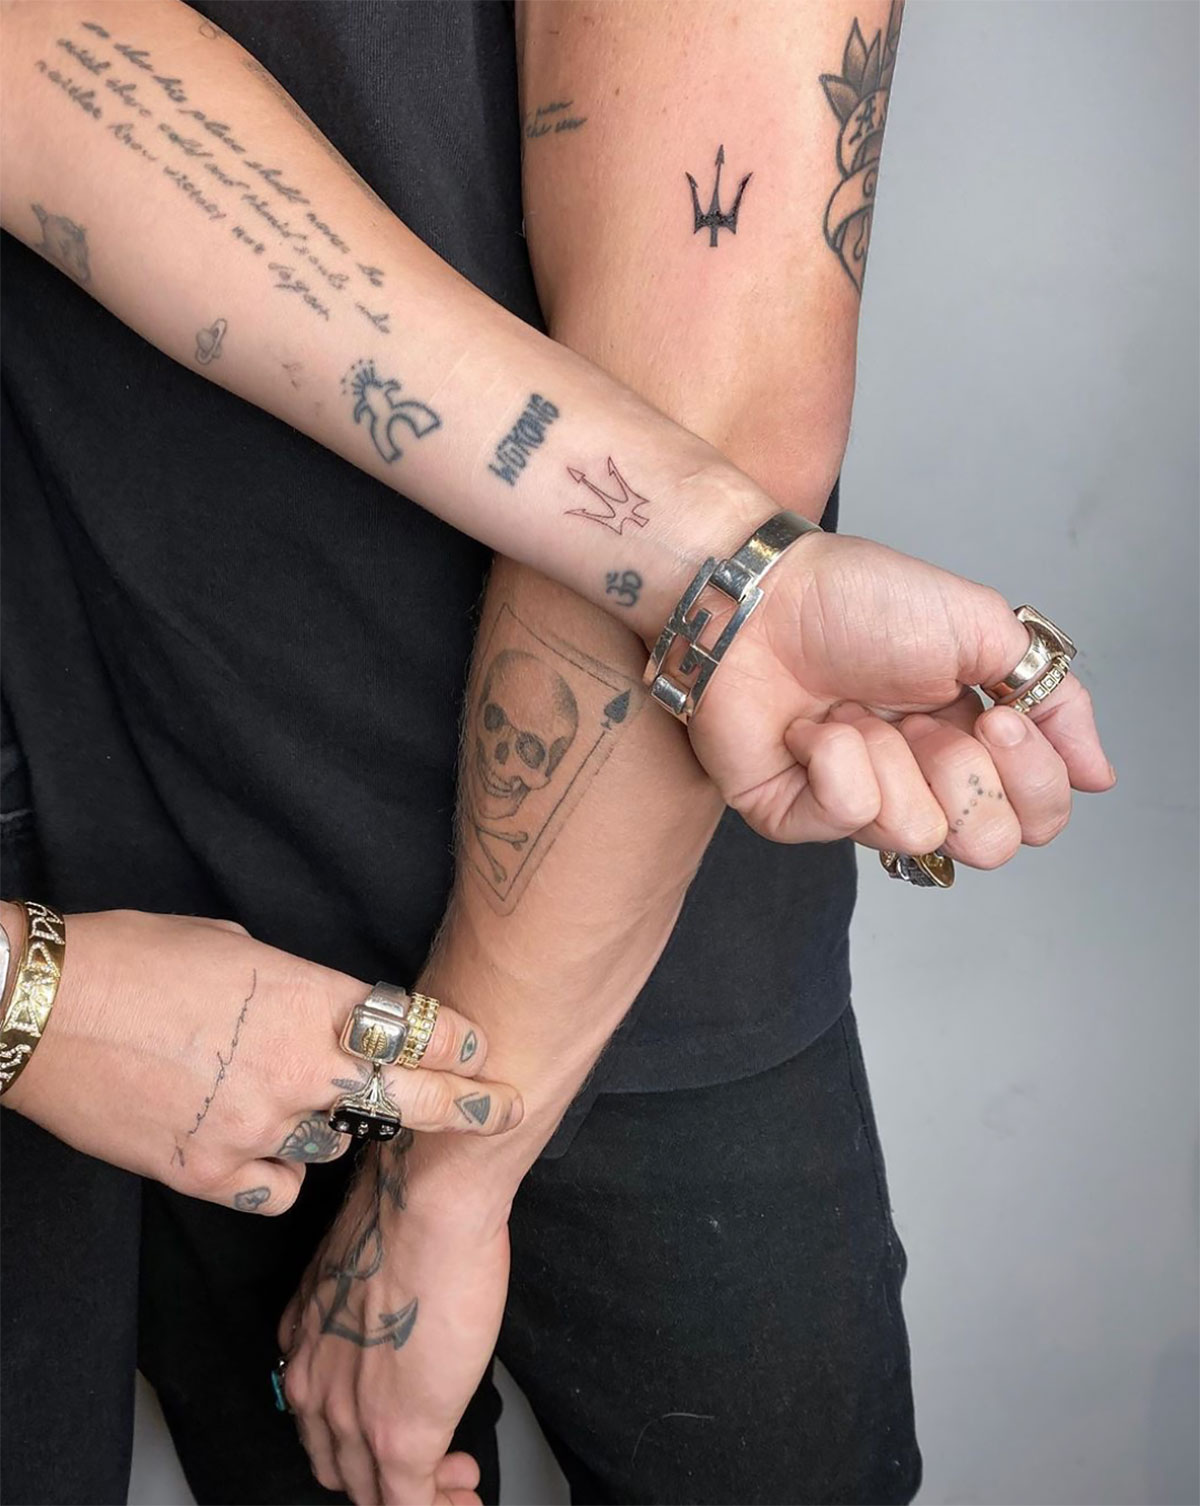 11 Matching tattoos for best friends: Quotes, friendship symbols, and more